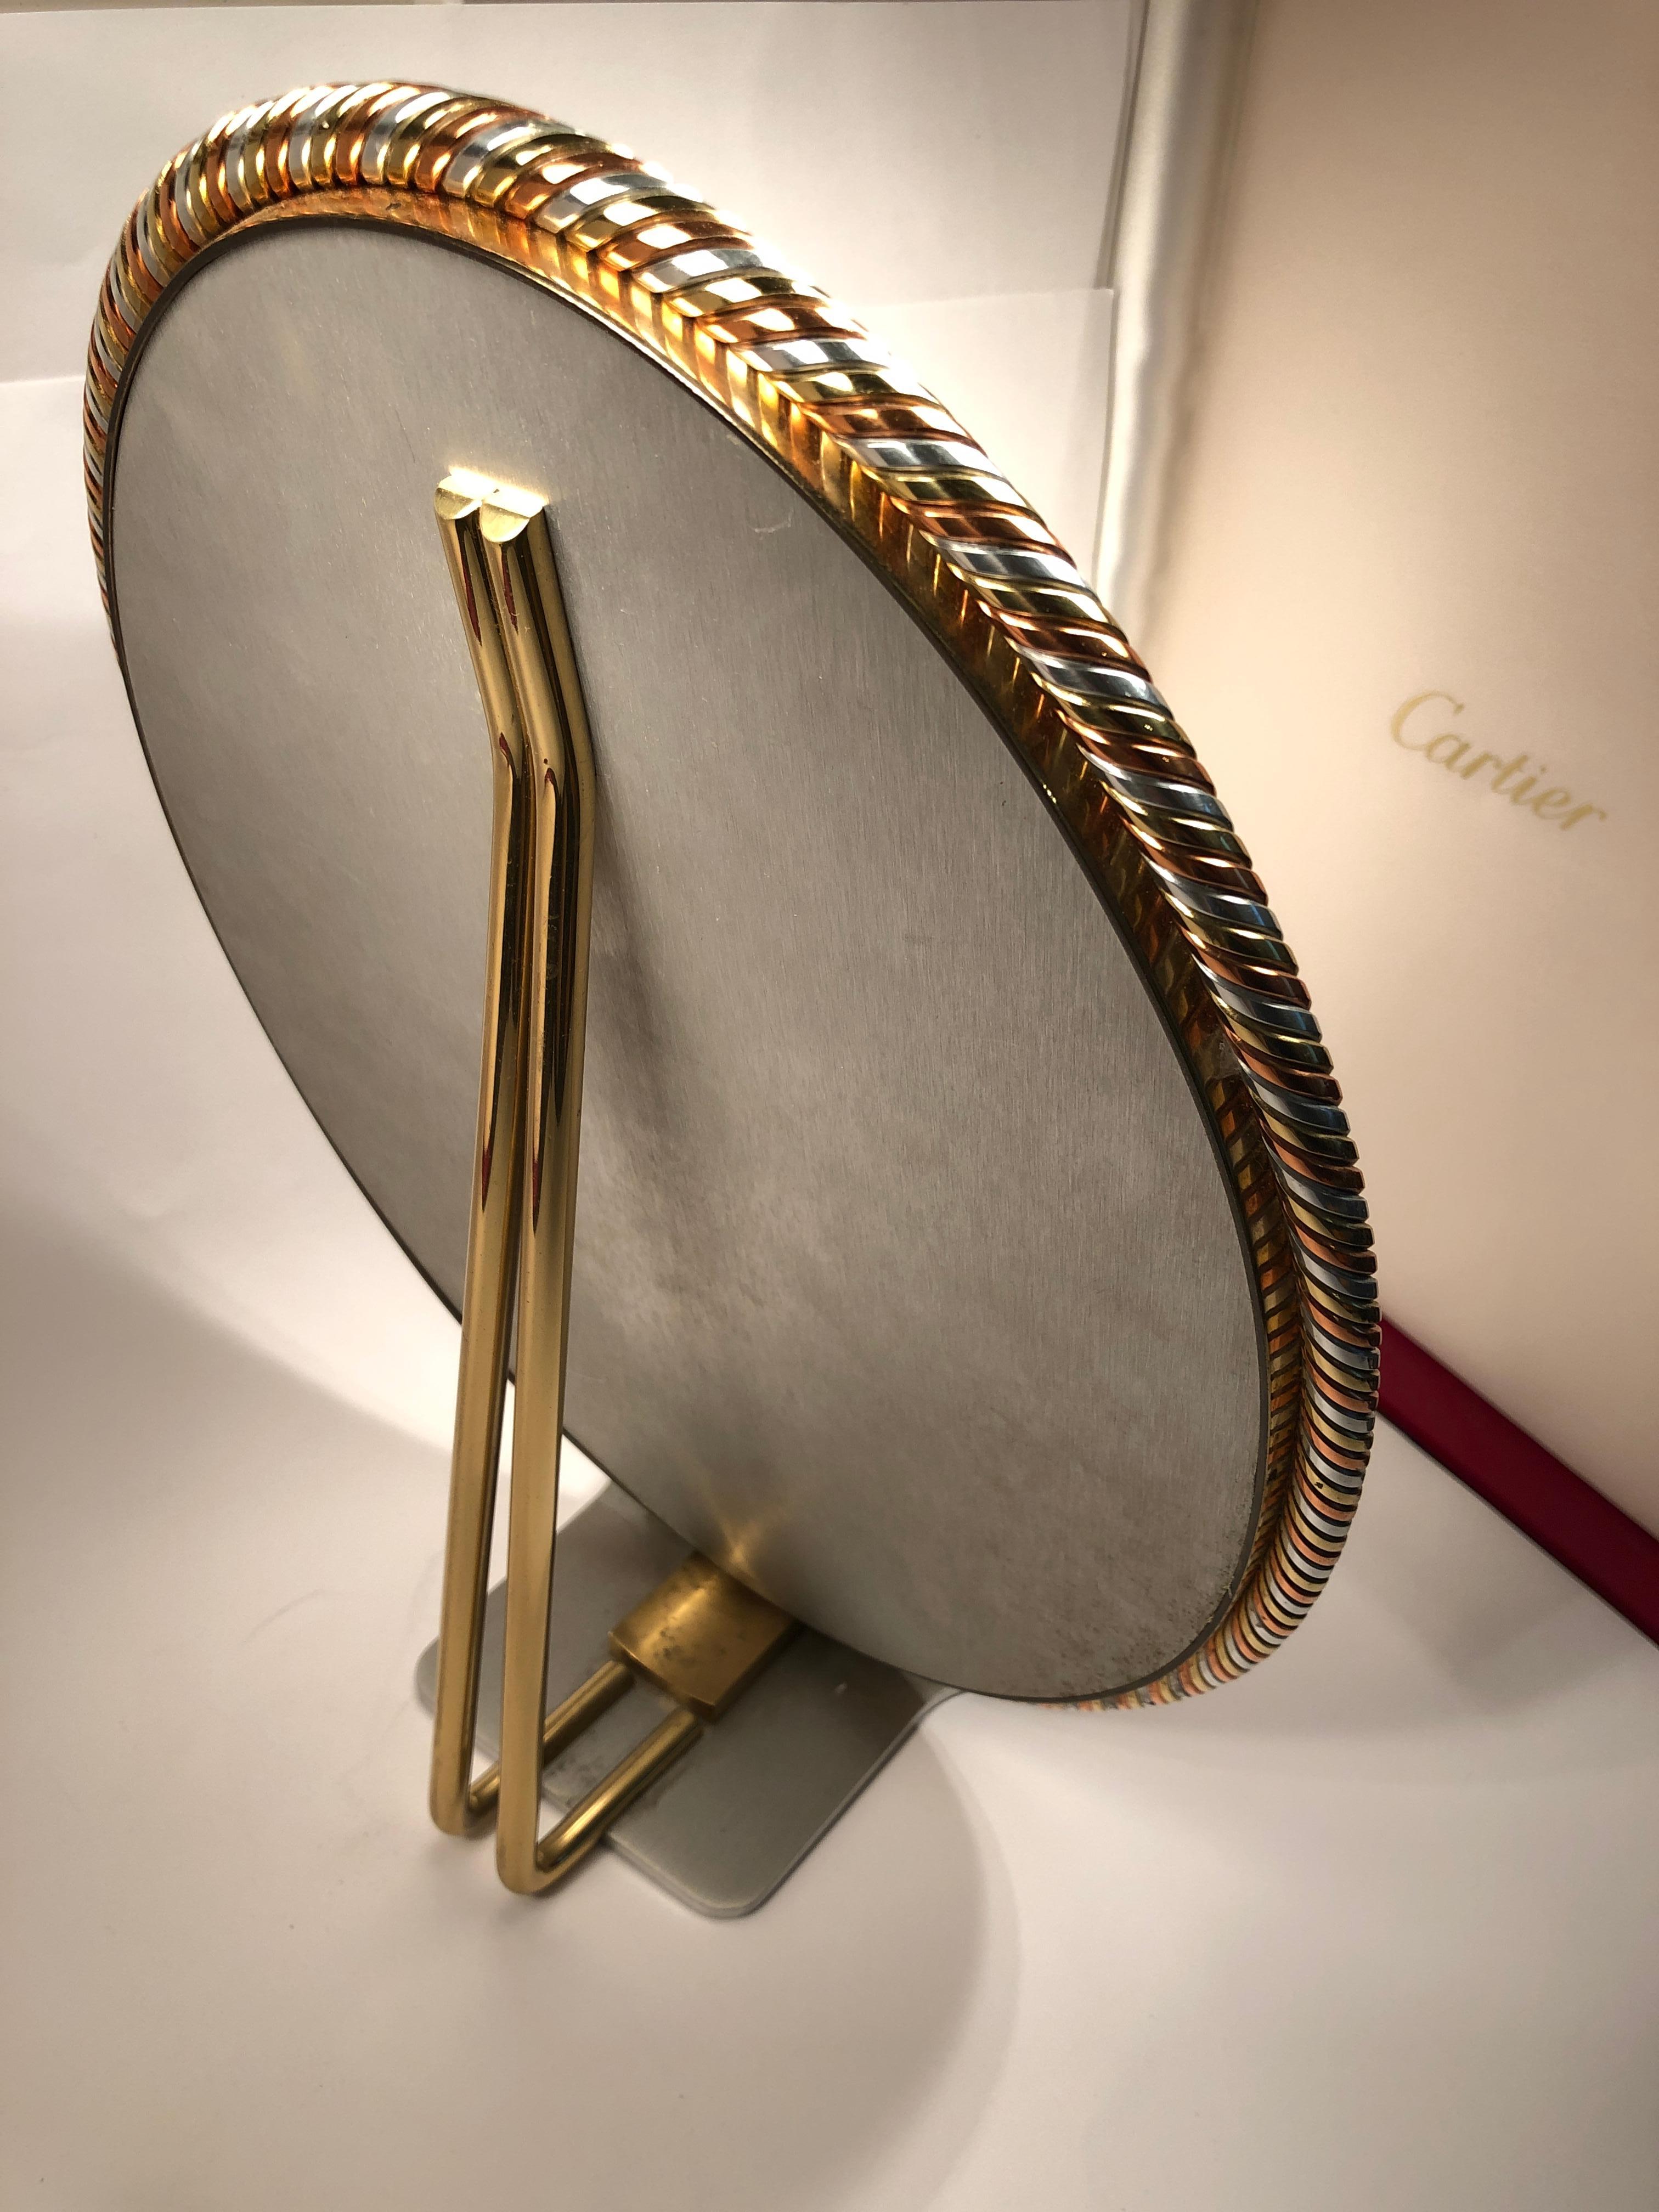 For your consideration a beautiful table mirror by Cartier with white, rose and yellow gold details.

1970s made in France. 

This piece is in near excellent condition with minimum rust and sign of wear.

An amazing and seldom piece.
 